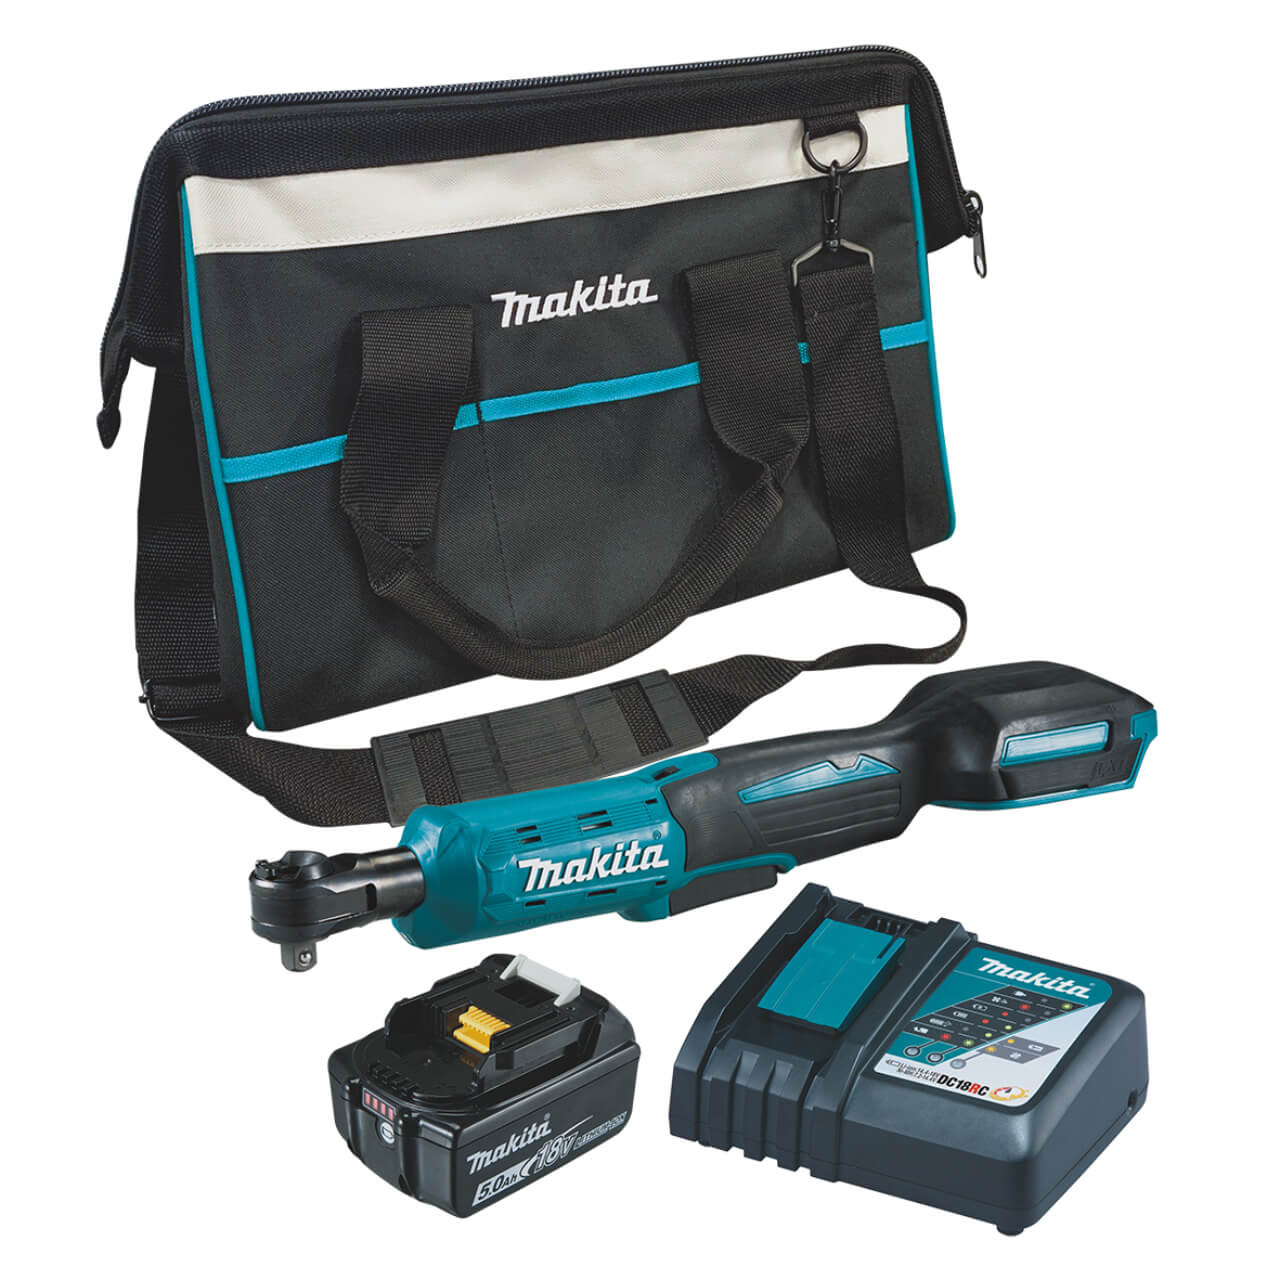 Makita 18V Ratchet Wrench 1/4” & 3/8” - Includes: 1x 5.0Ah Battery. Rapid Charger & Tote Bag